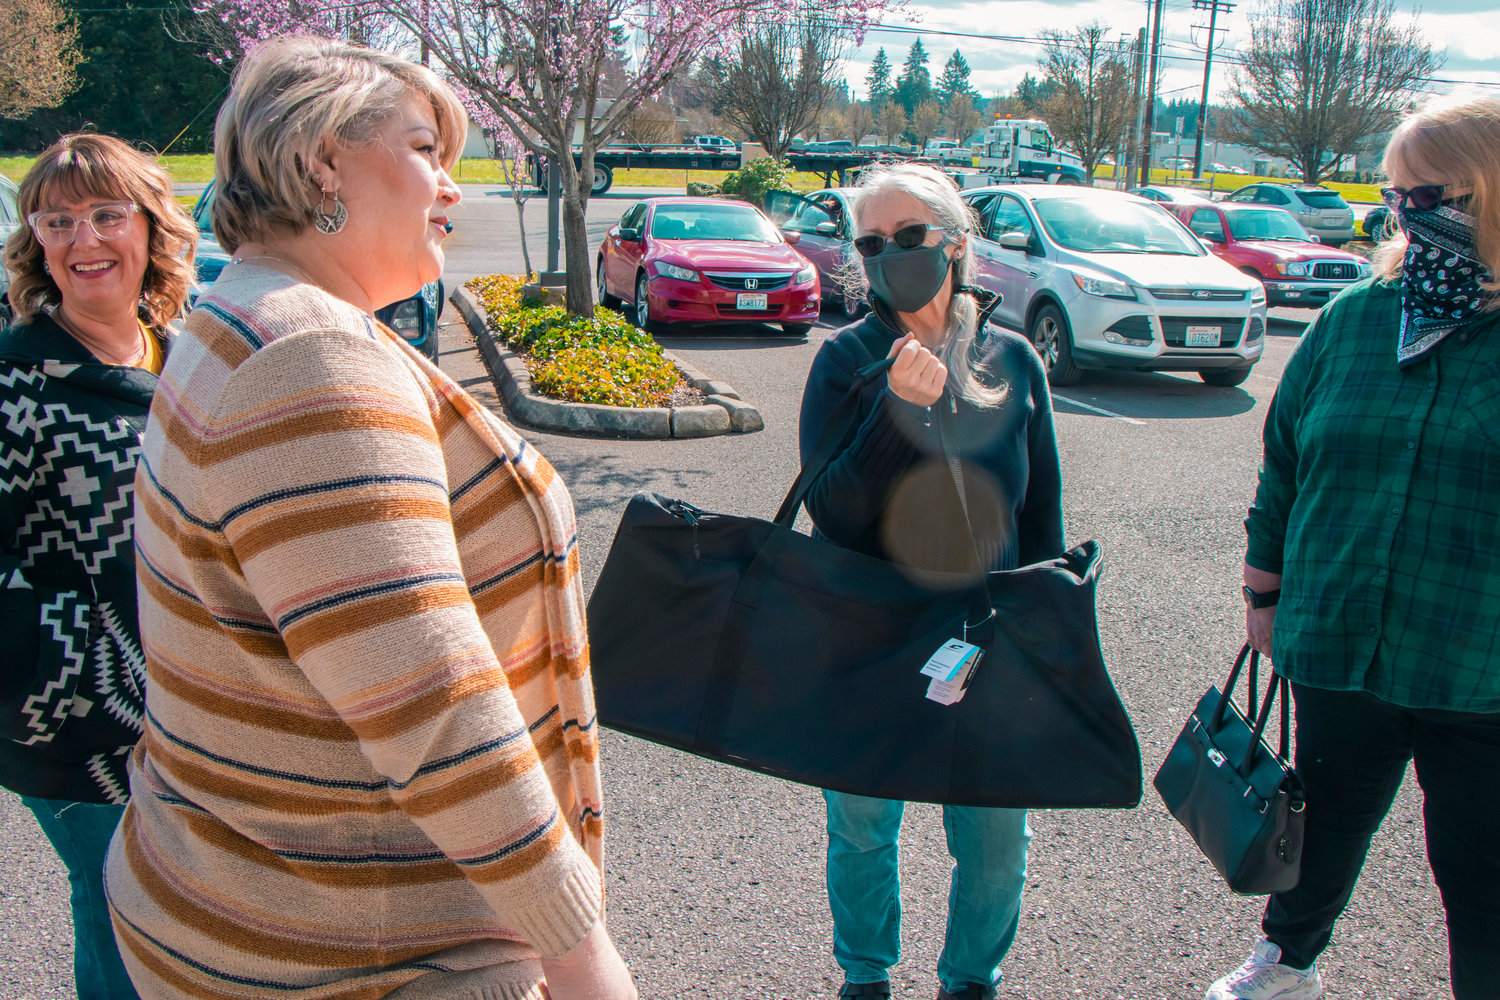 Barbara Kerschner holds a duffle bag similar to ones received through grant money to send with kids to their new homes Tuesday afternoon outside the Children and Family Services office in Centralia.